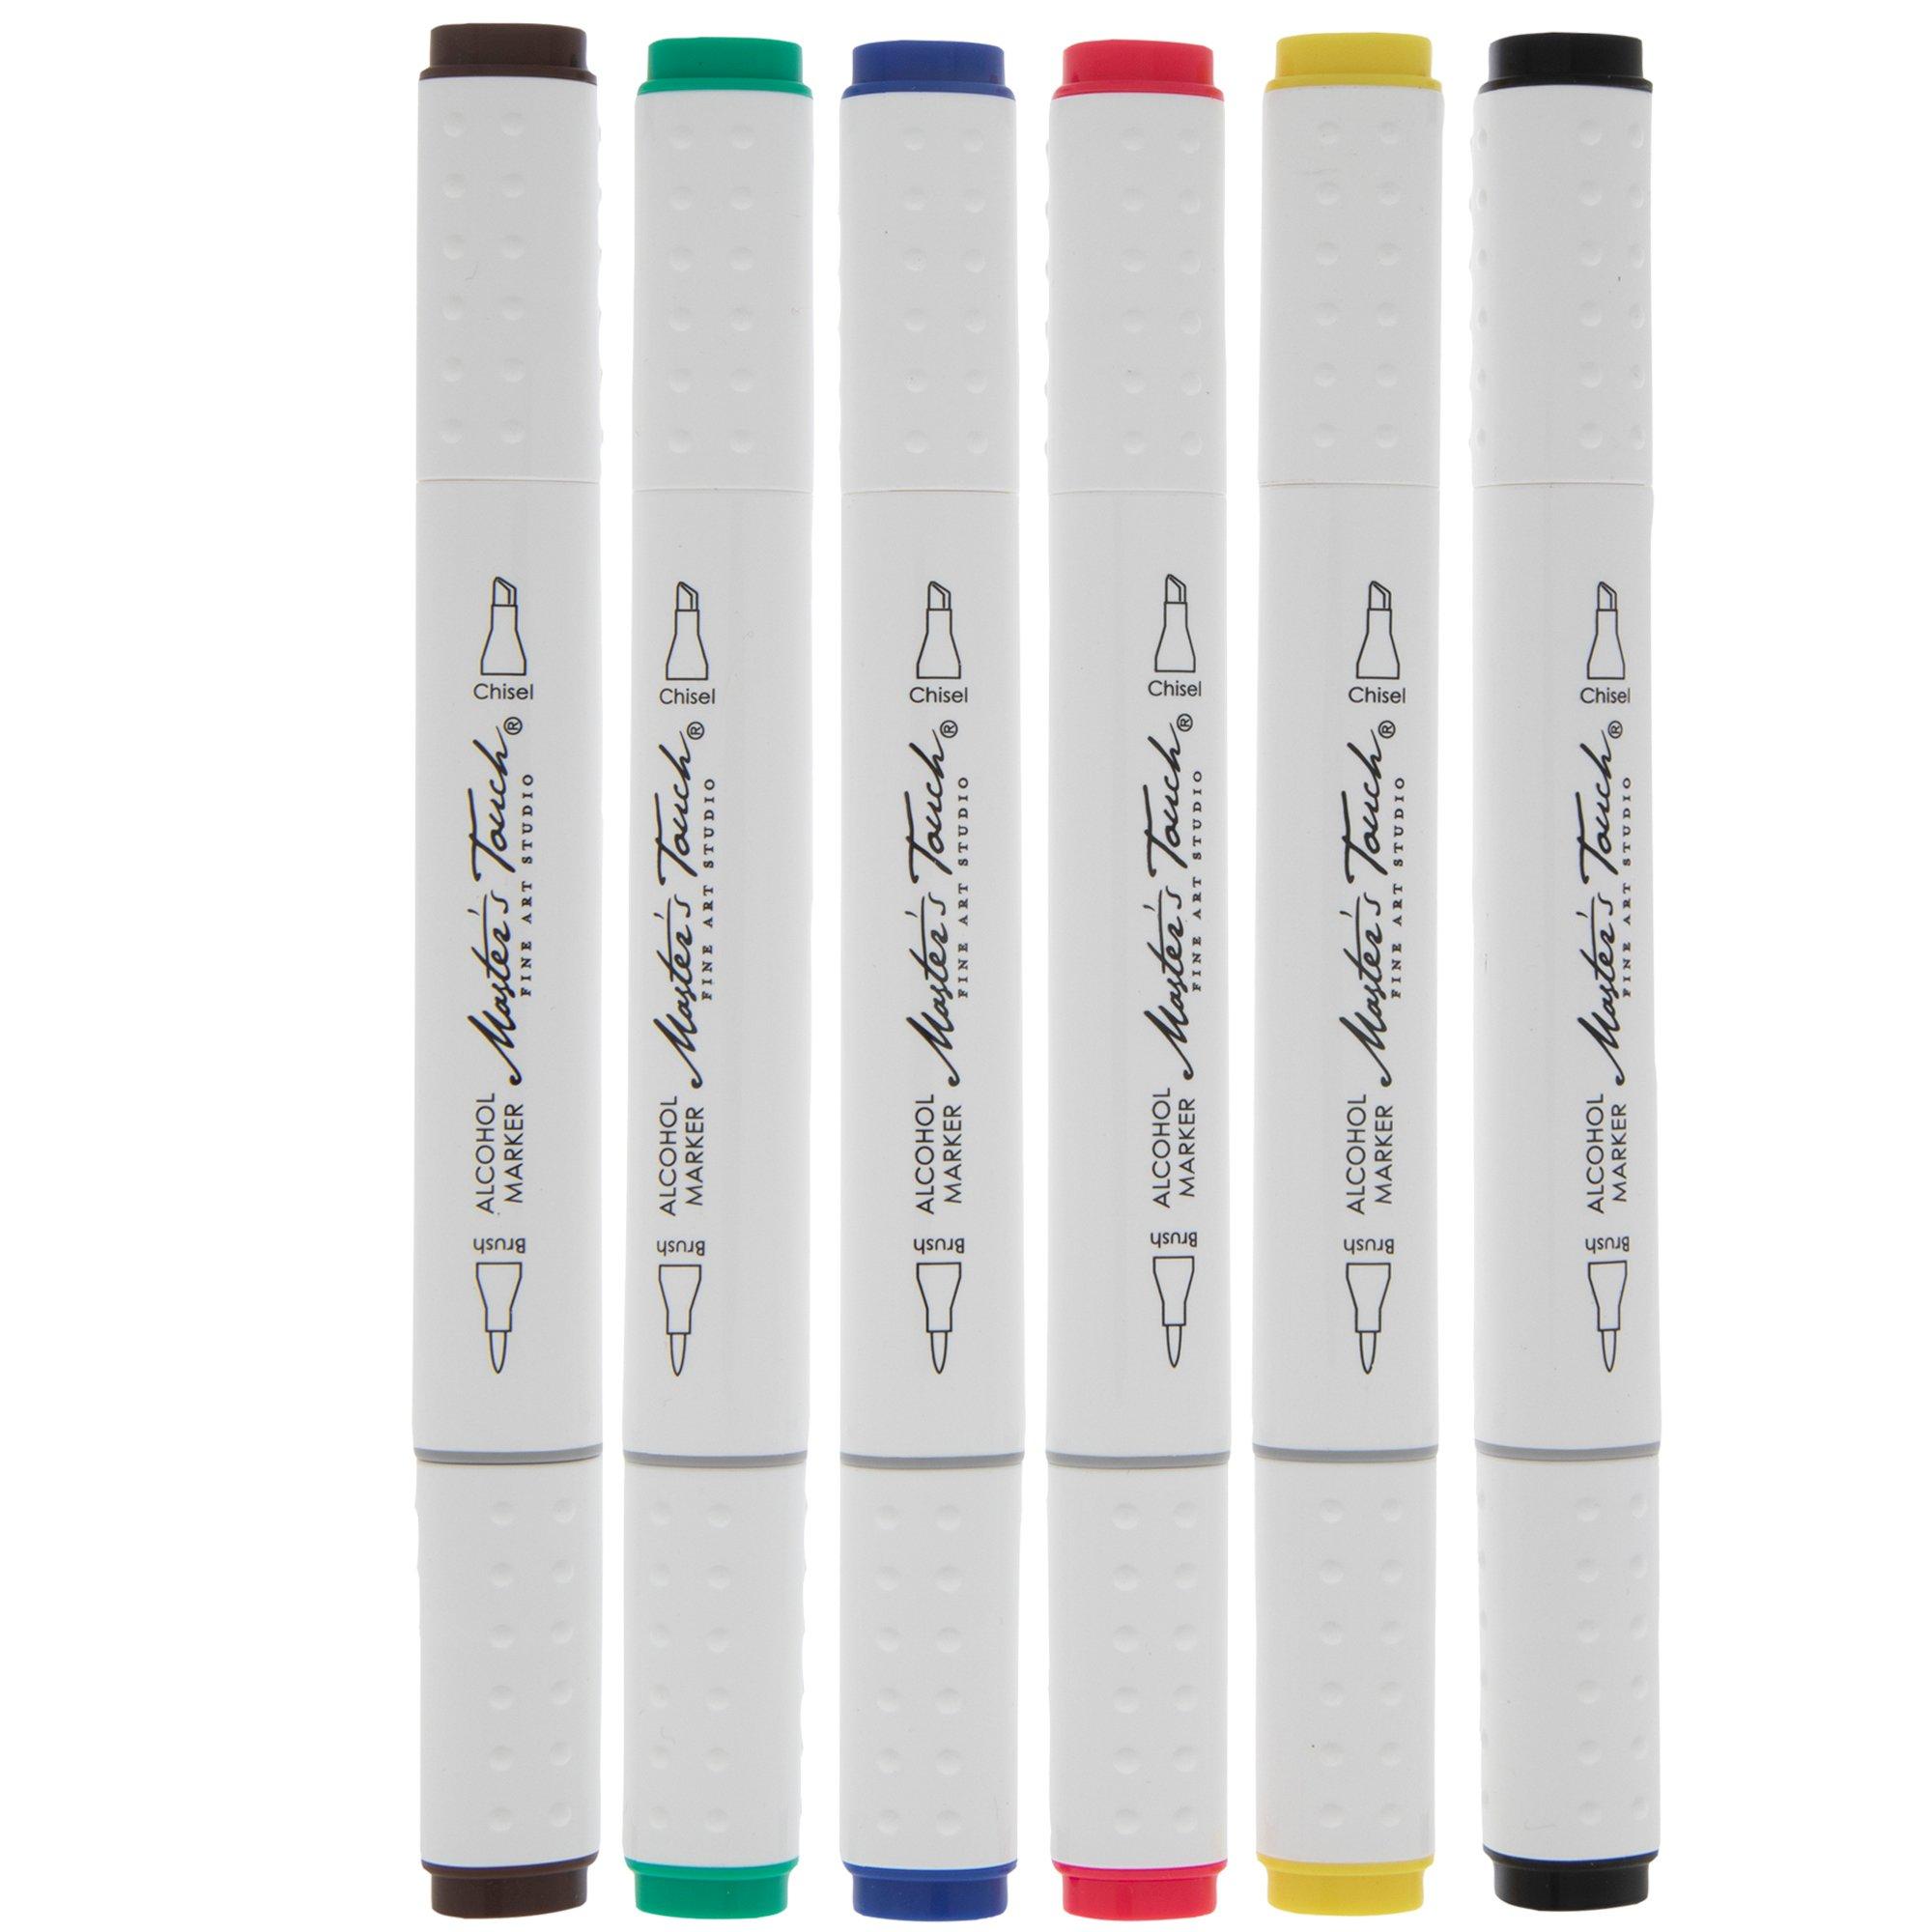 Afflatus TOUCH TWIN ALCOHOL BASED MARKERS SET PACK